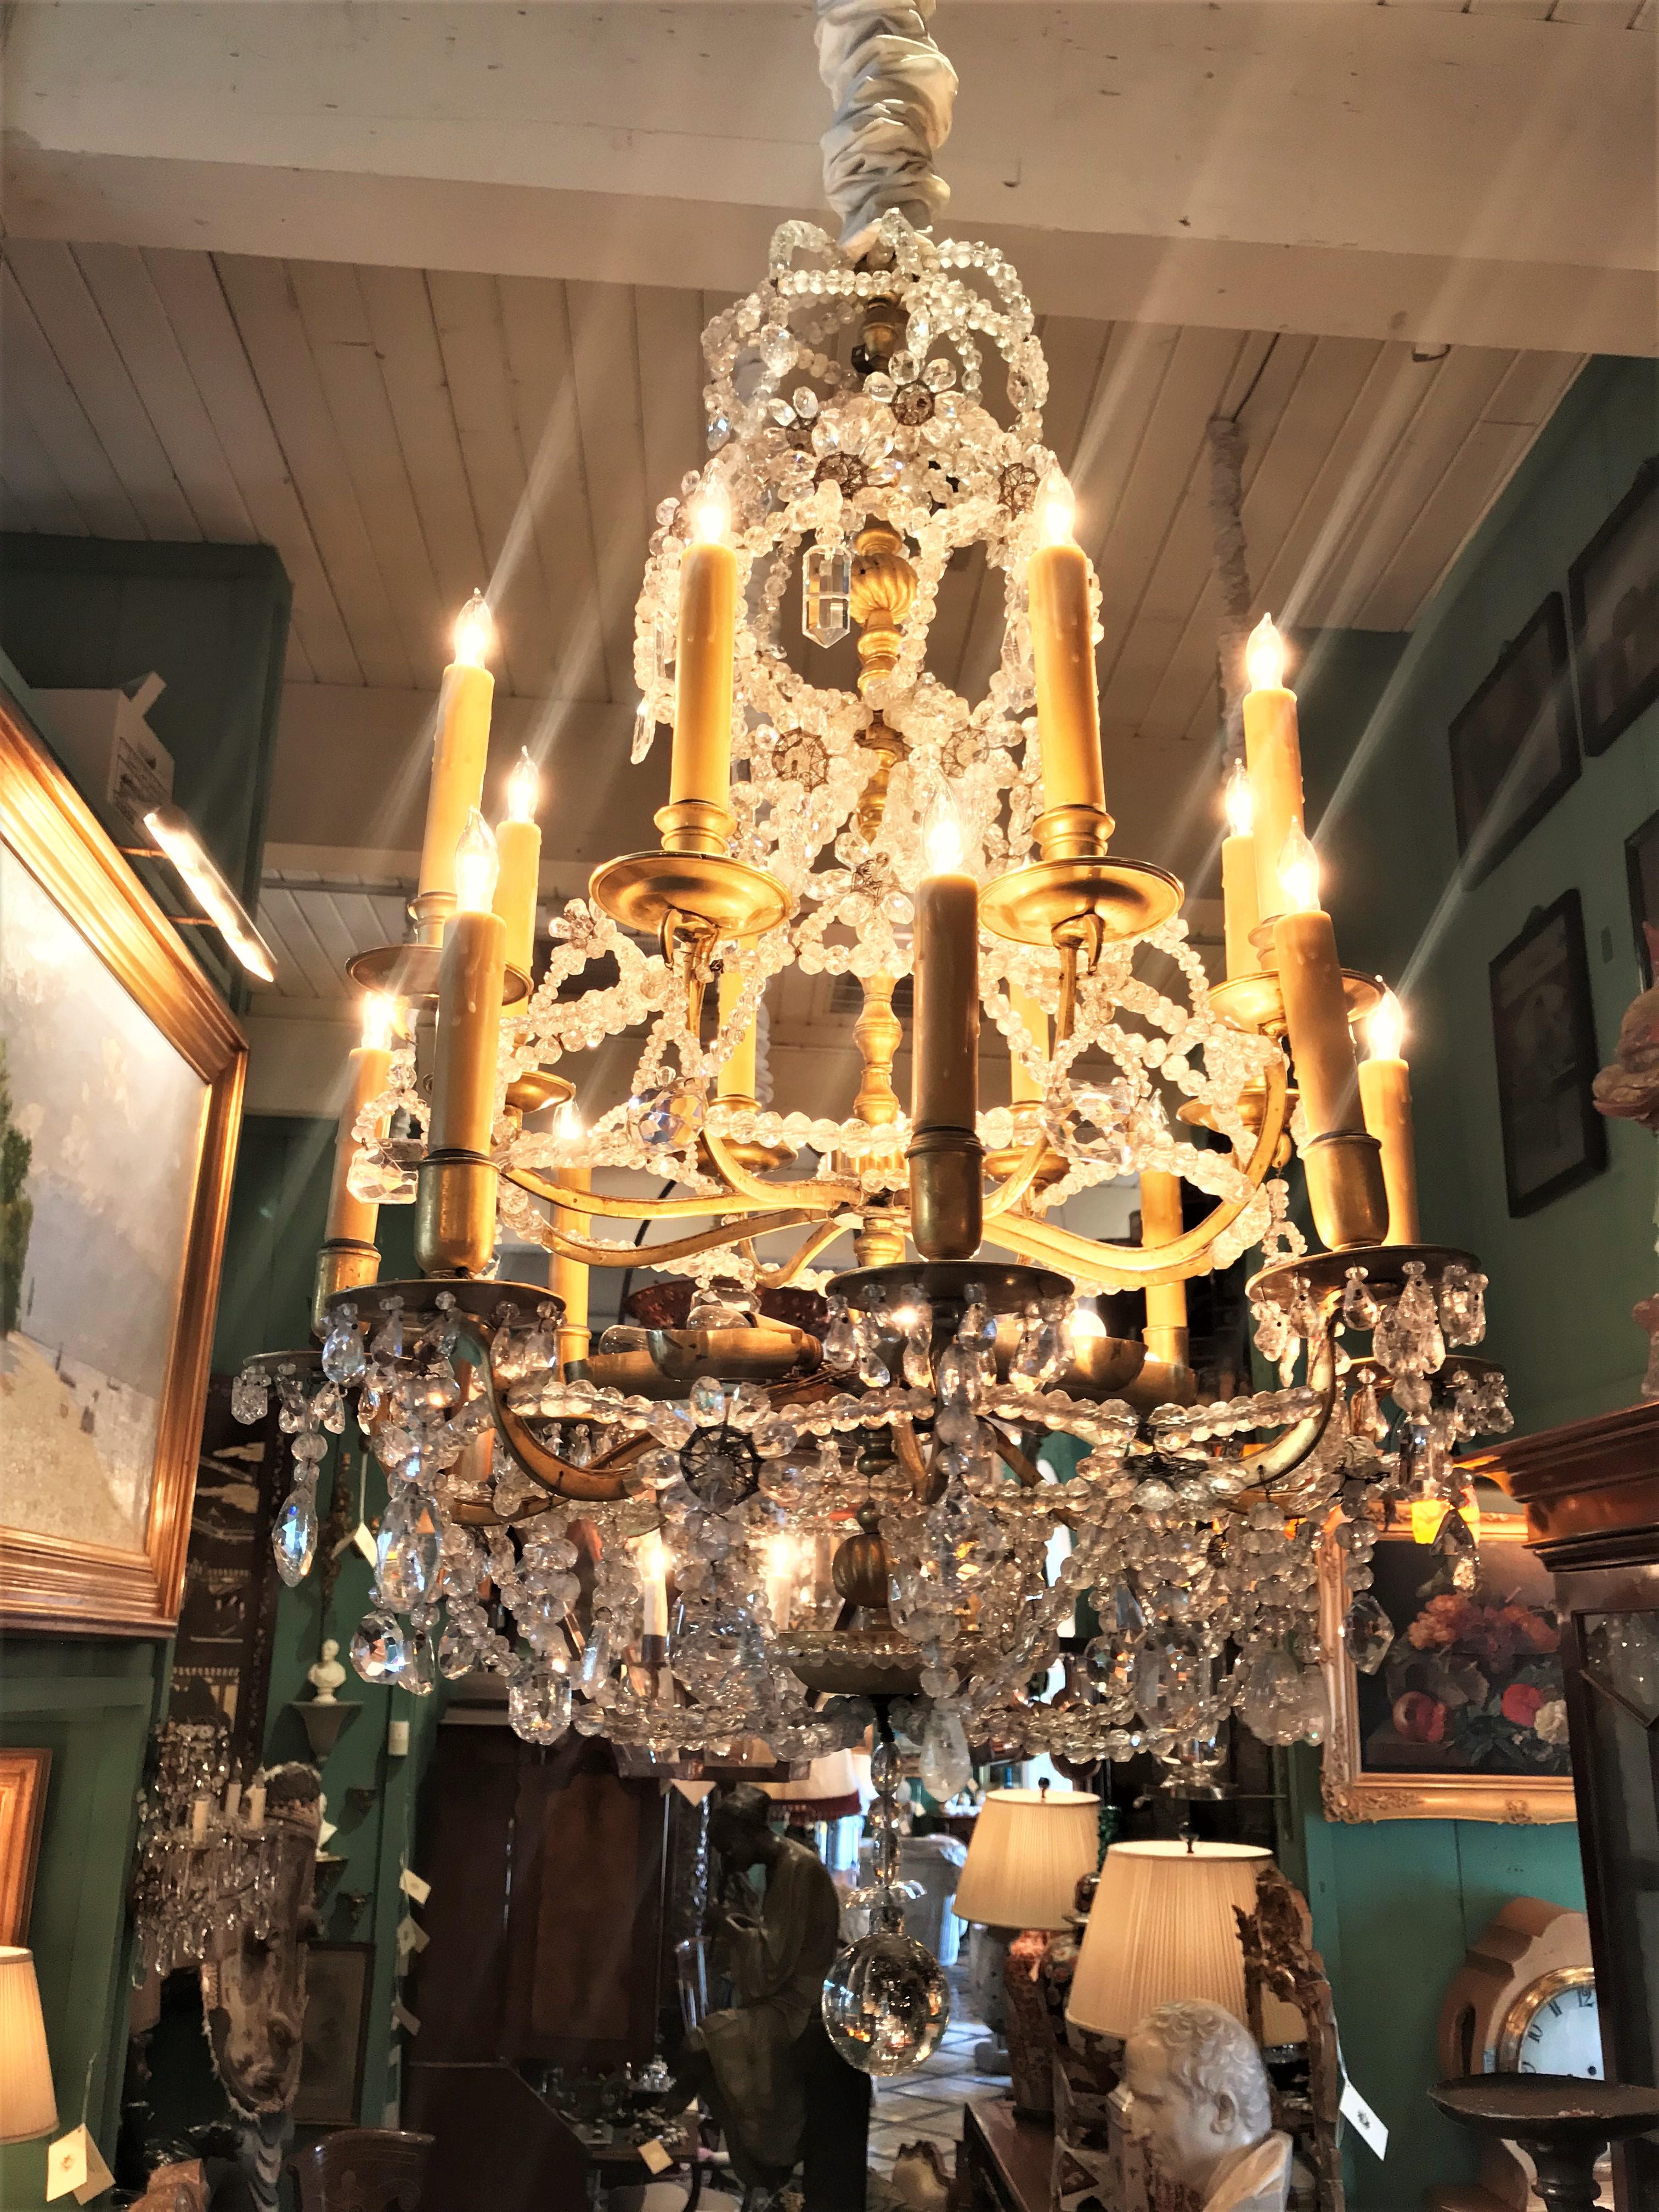 18th C. Ormolu Rock Crystal 16-Light Chandelier hanging ceiling light pendant LA .A sensational and rare French mid-18th century Louis XV transition Louis XVI period handcrafted Rock crystal and Glass ormolu with an exceptional 16-light chandelier.